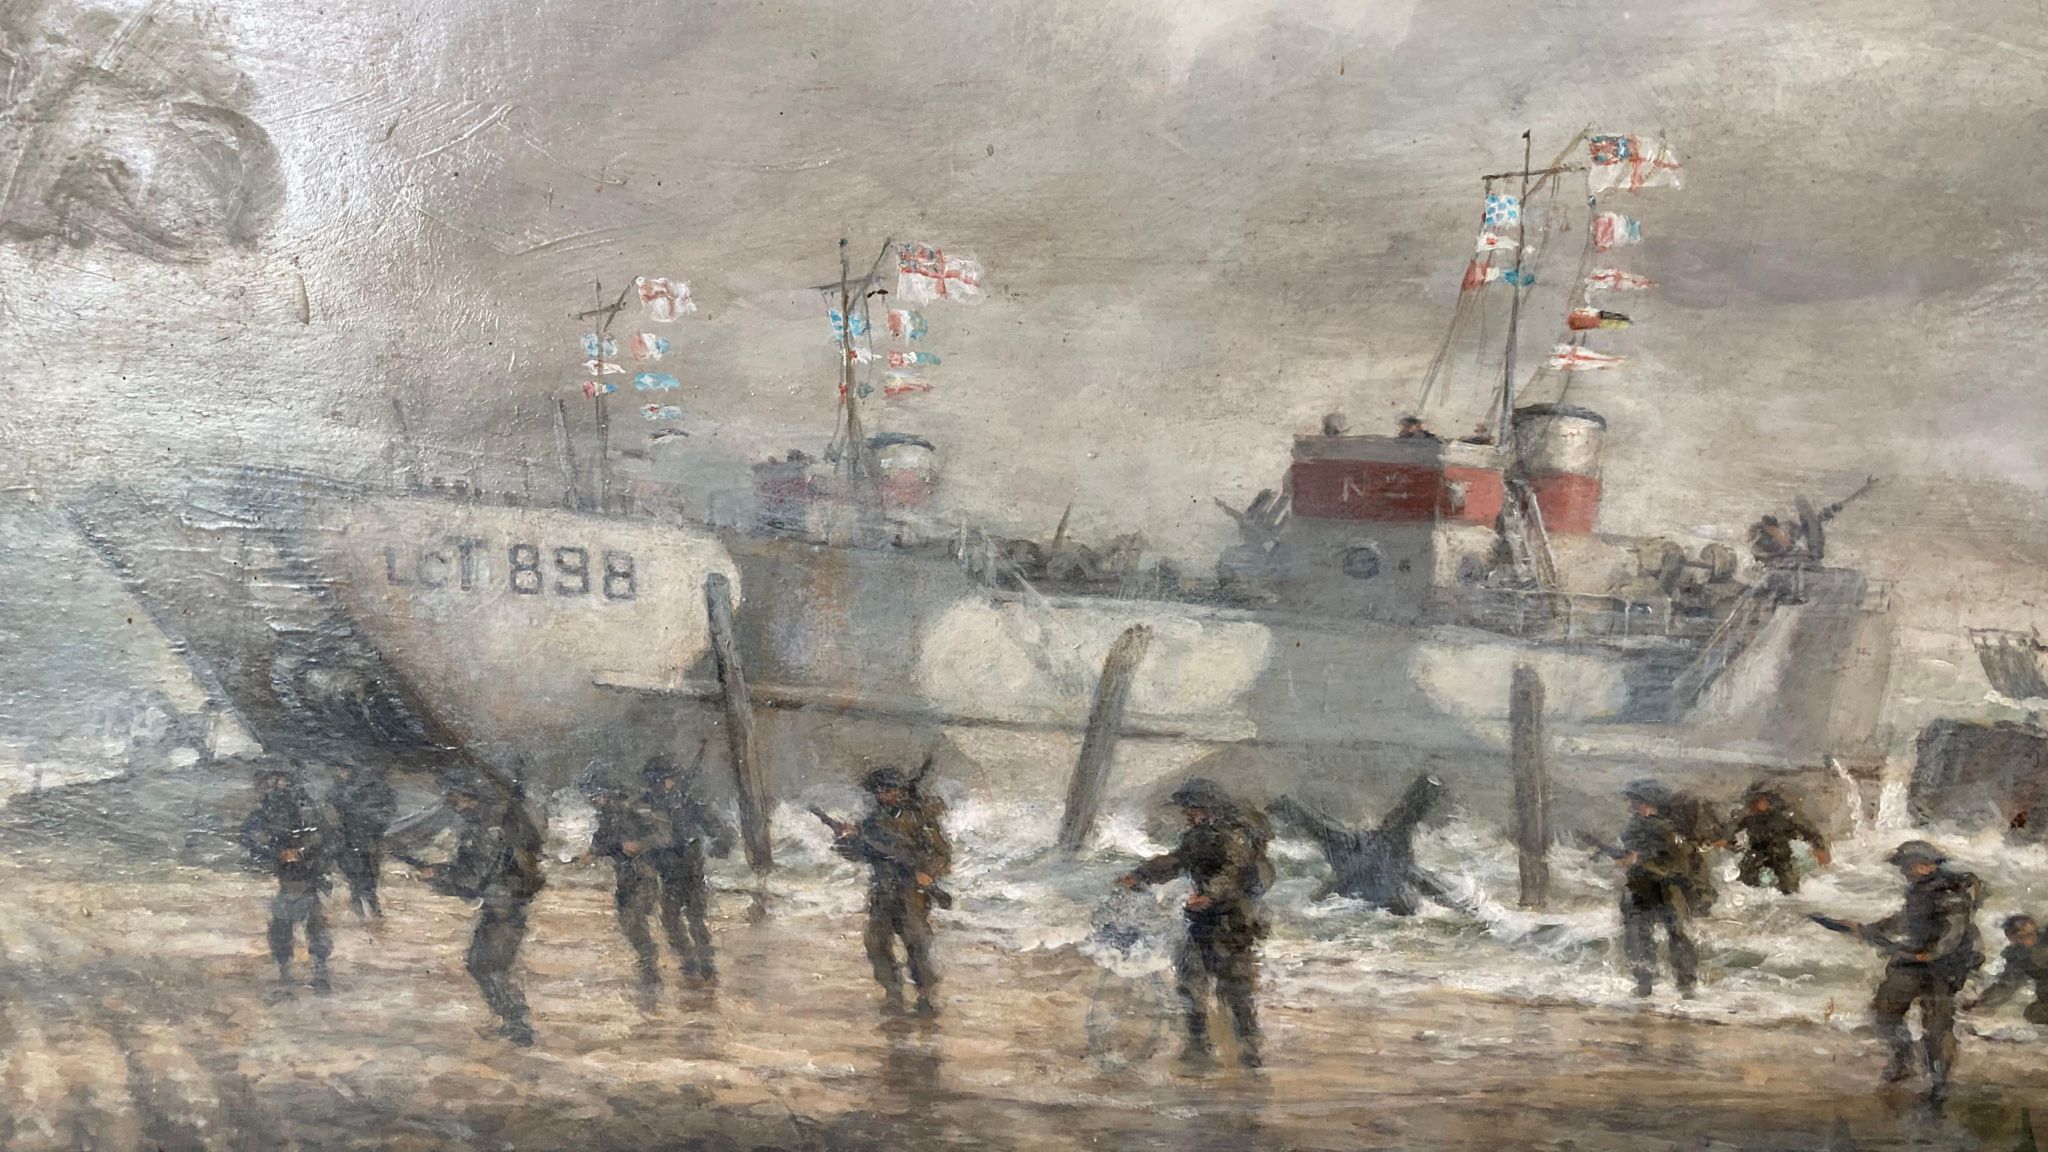 A painting of D-day by Lt Willis